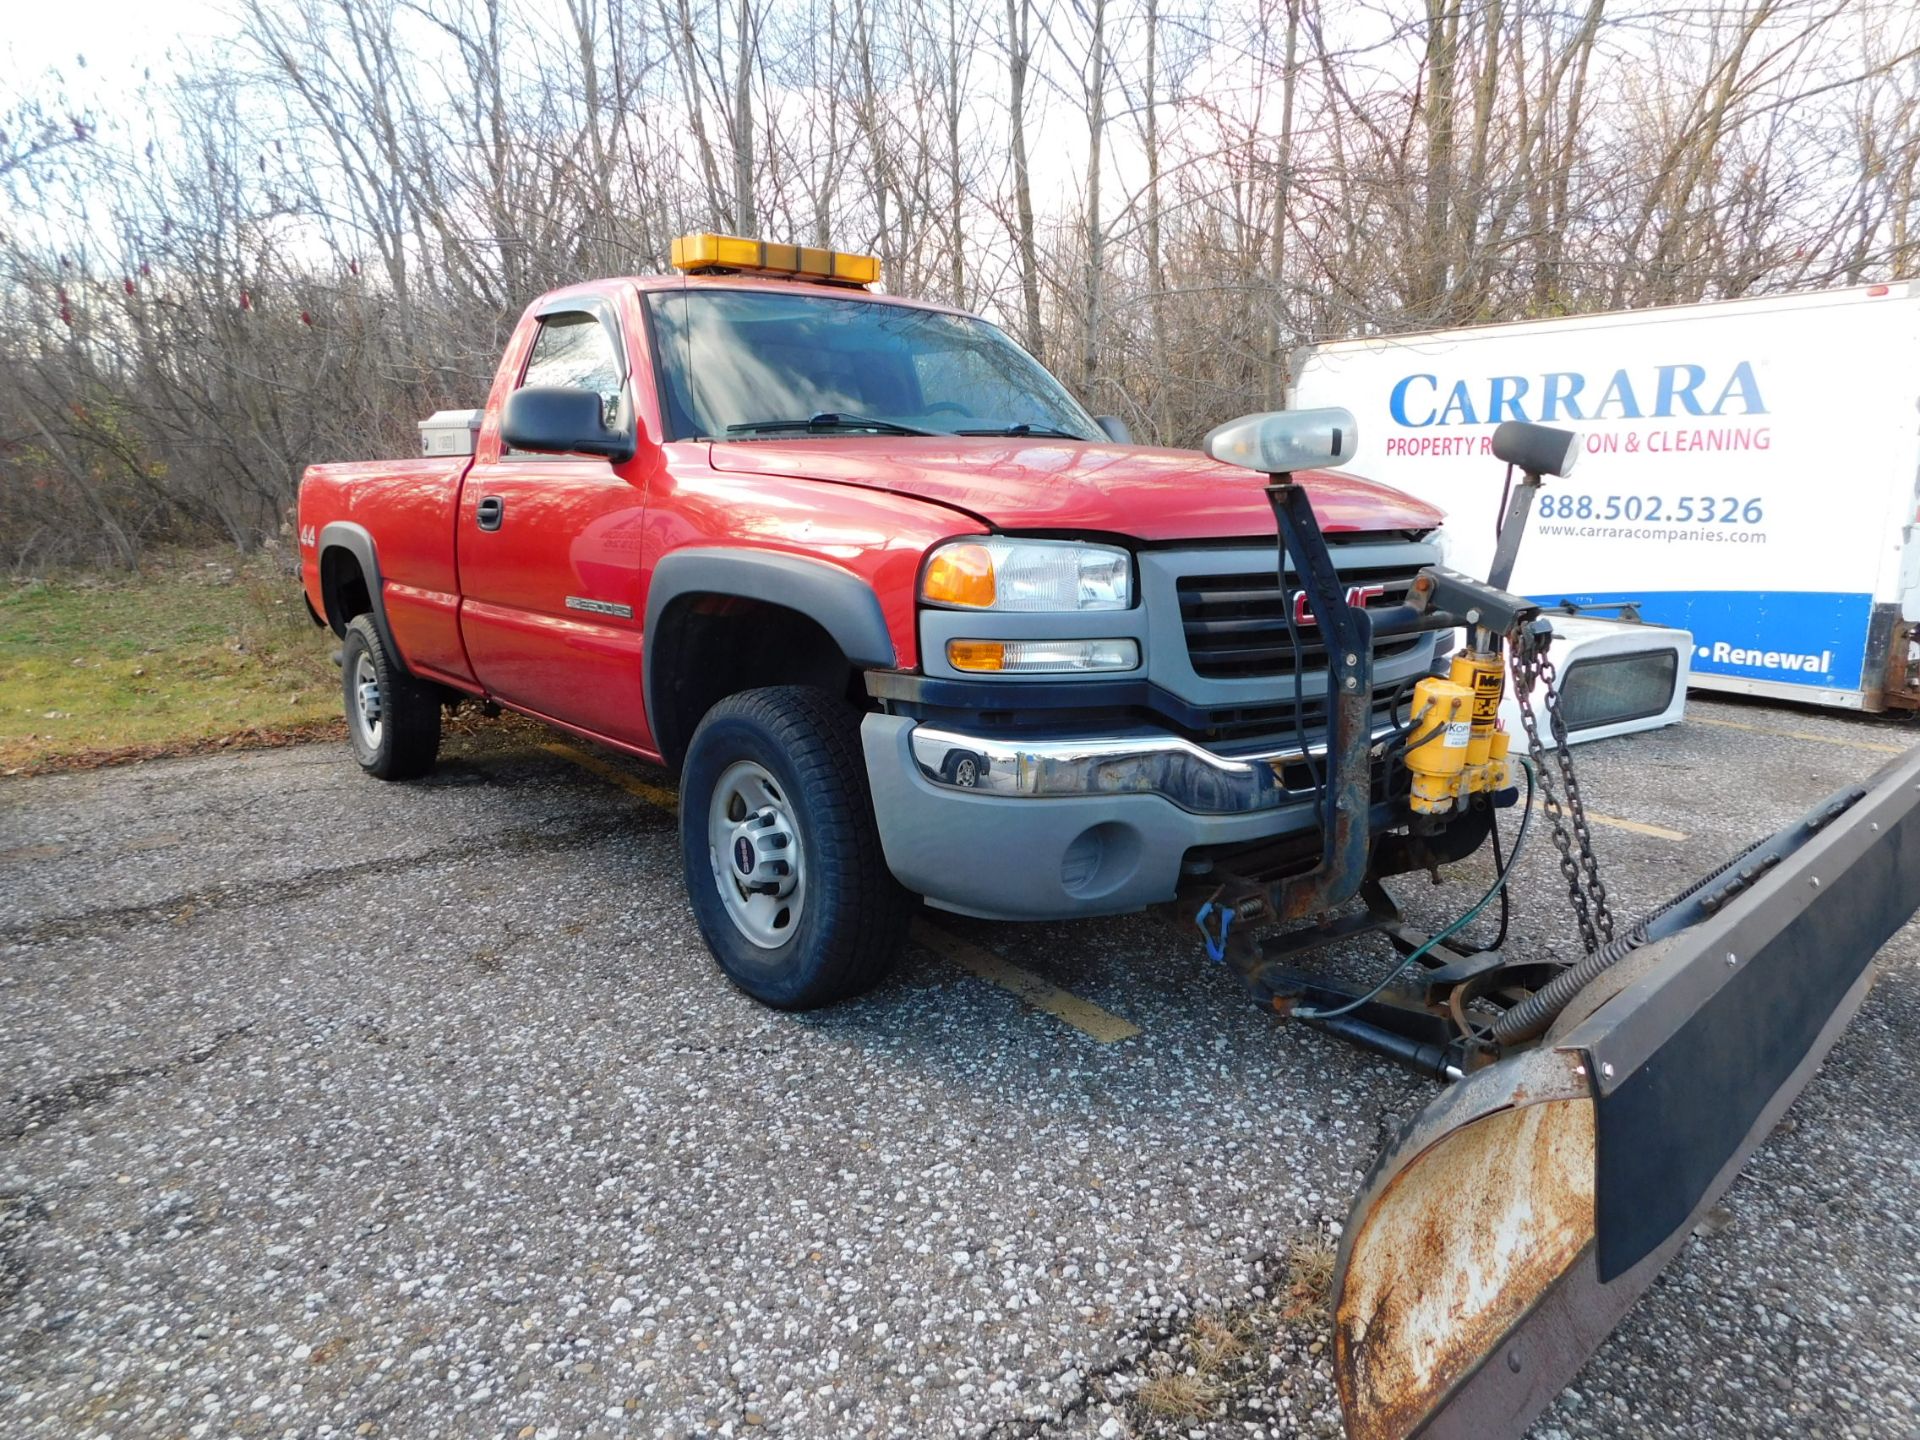 2005 GMC 2500 HD Pickup with Snow Plow, VIN 1GTHK24U05E308334, 4 WD, Automatic, AM/FM, Started